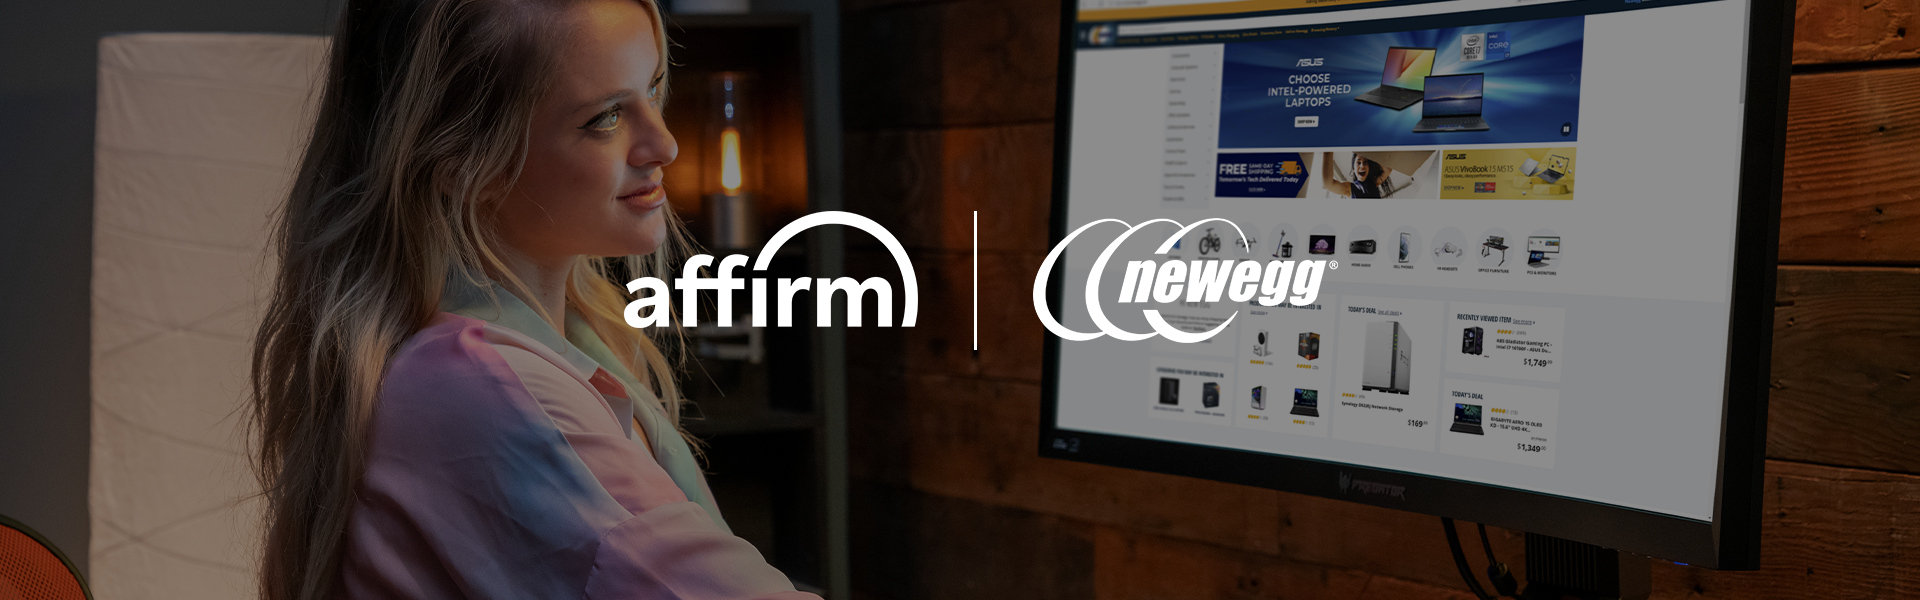 Newegg partners with Affirm